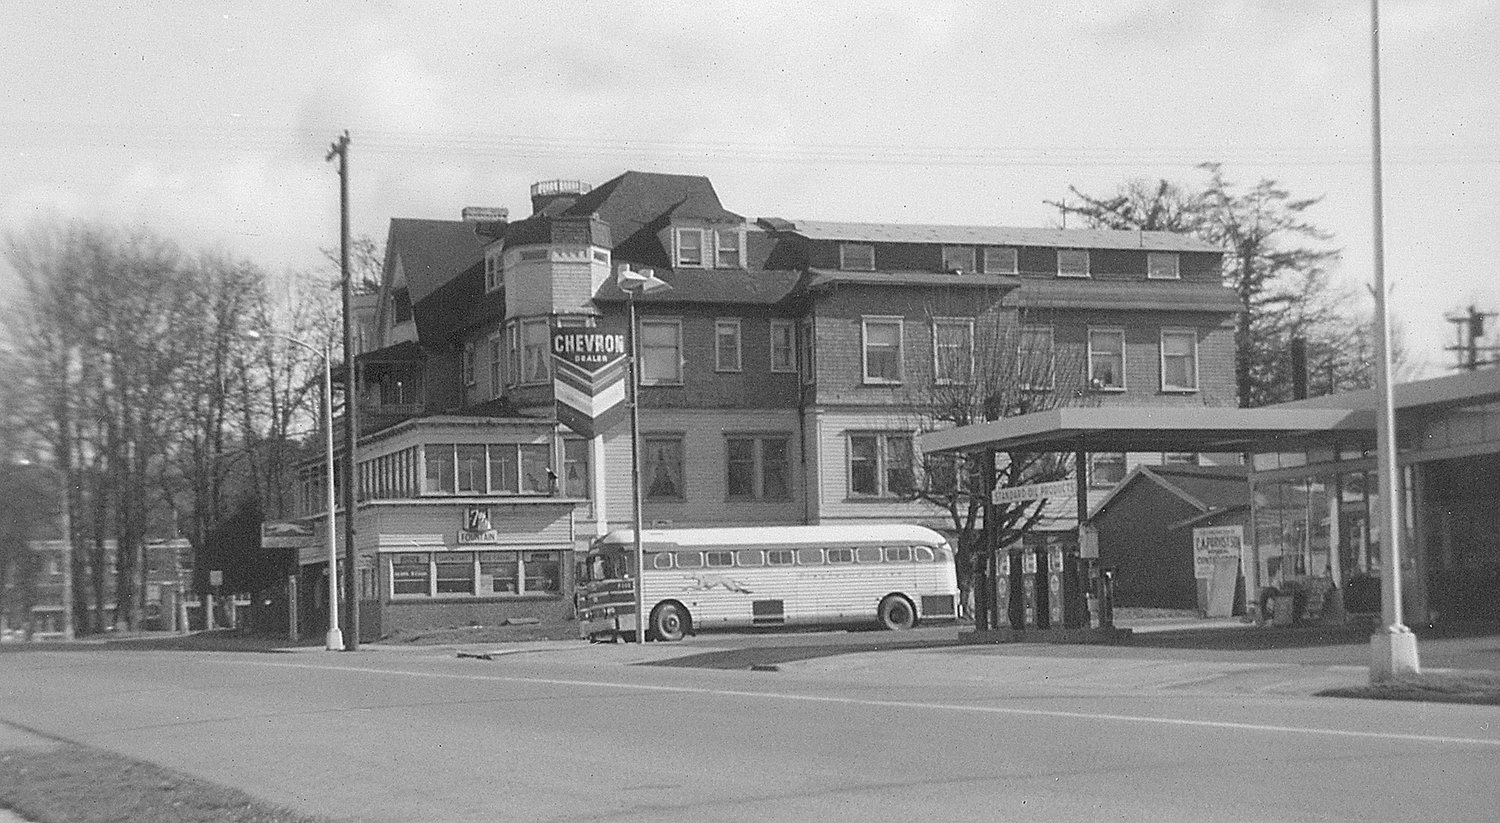 In June of 1959 the last bus left the old Centralia Hotel between Silver and Iron on Main Street in downtown Centralia. Now demolished, the once-grand hotel was located where the Campbell Chrysler Jeep Dodge car lot was located before it closed. Louis Stoffer was 35 in June of 1959 and knew that at about 4 p.m. the last bus would be leaving the hotel. The Centralia Hotel was one of the finest hotels in Centralia, Stoffer recalls. The bus station was on the ground floor on the west end of the hotel. During World War II, many soldiers left that station to begin their stints at Fort Lewis — Stoffer himself had taken that trip on July 21, 1943. (Originally submitted by Louis Stoffer for “Our Hometowns:  Volume 2”)